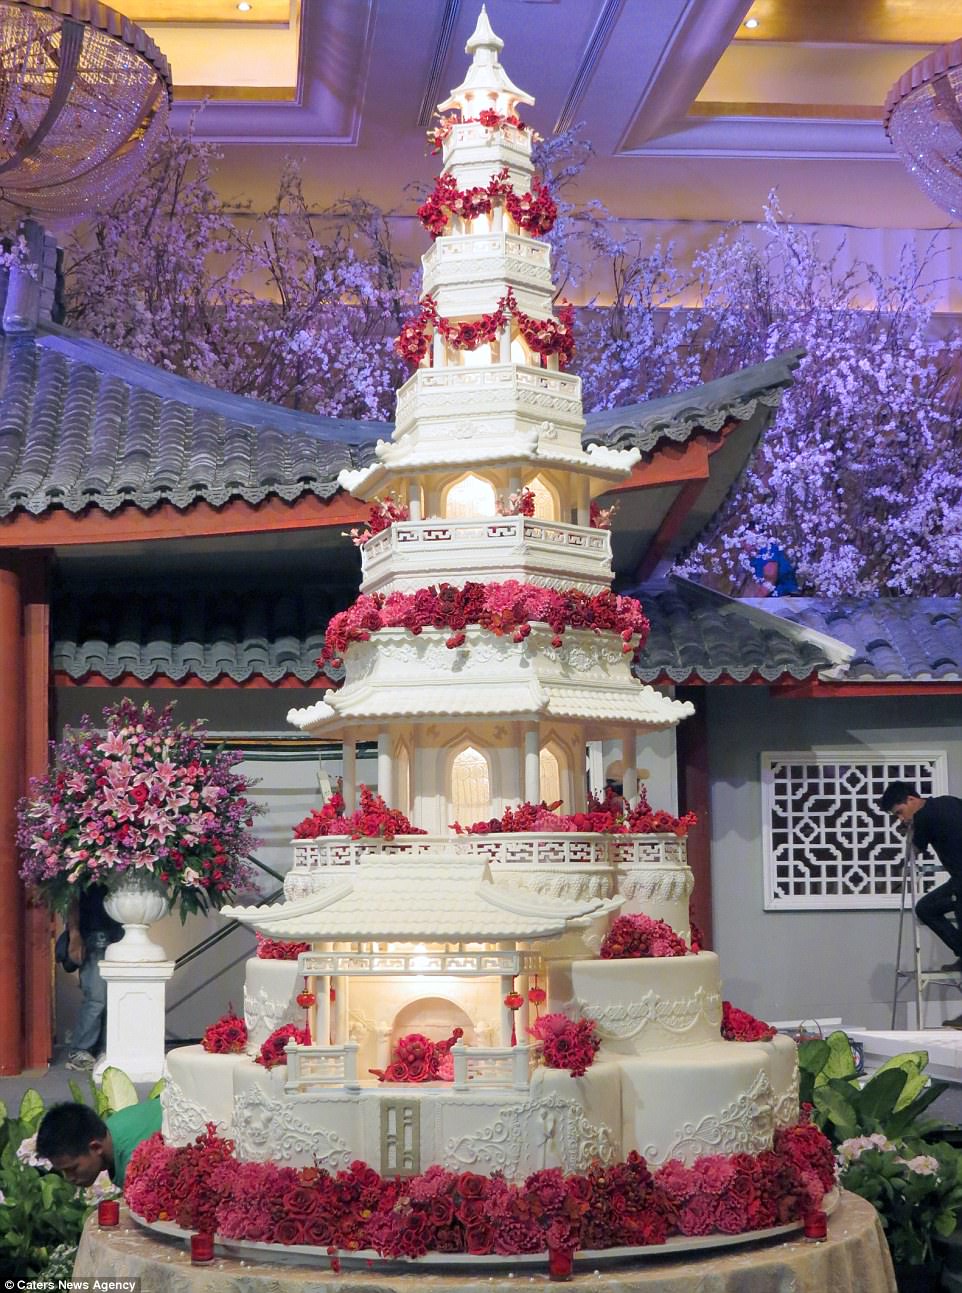 This breathtaking Japanese pagoda cake has an astonishing nine tiers. It features intricate icing detail, including a loved up couple on the bottom tier, as well as Japanese inspired symbols. Red flowers contrast against the white of the cake